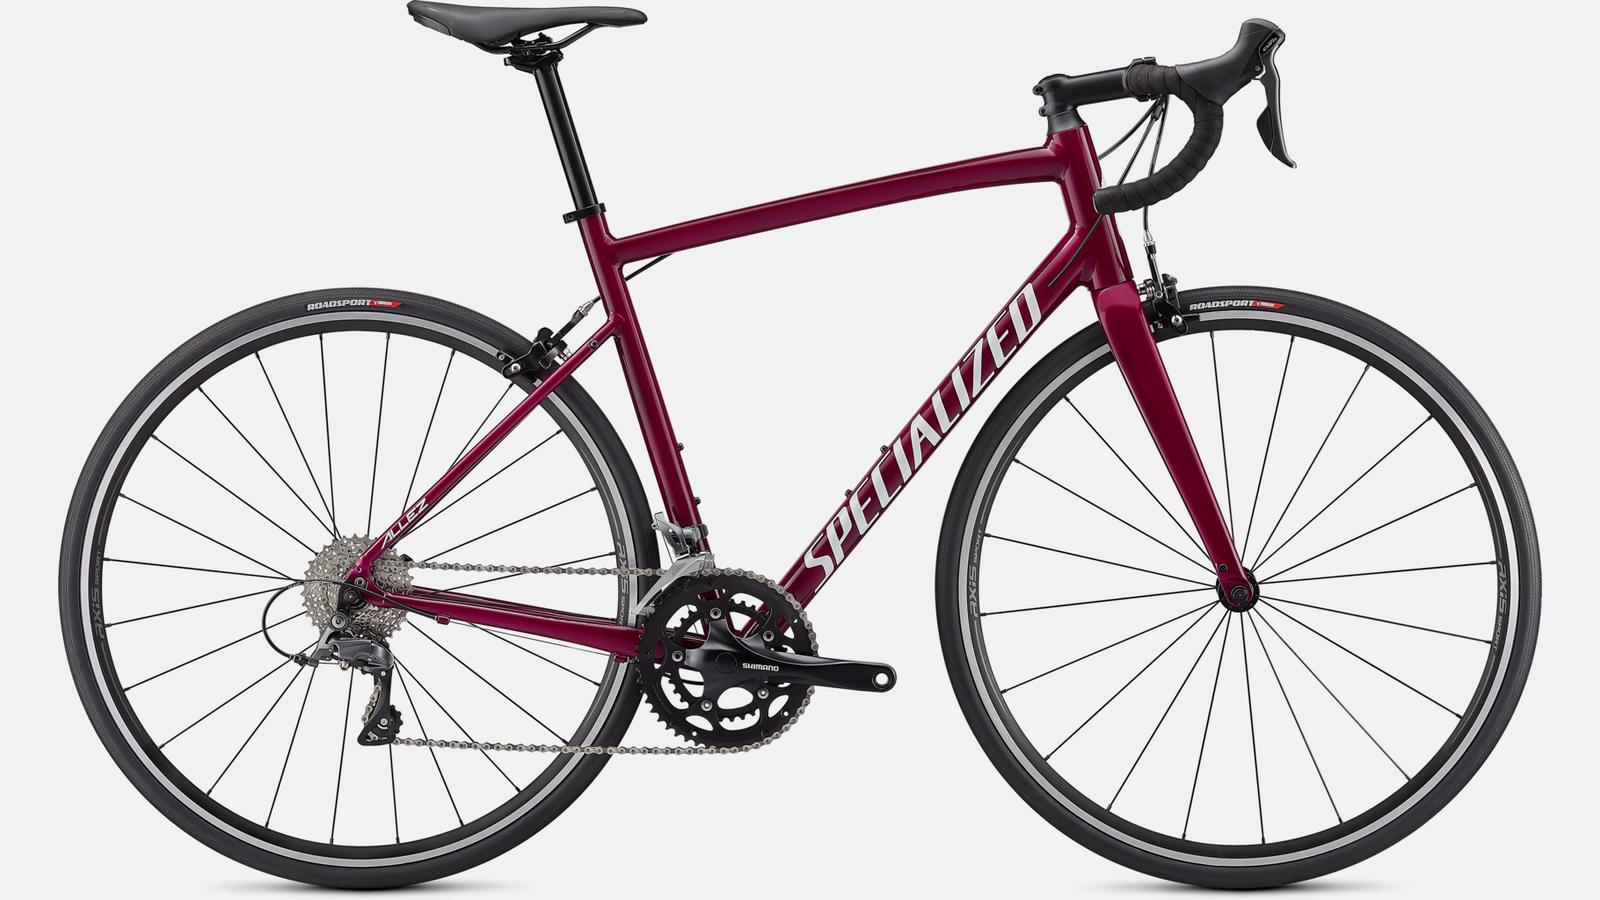 Paint for 2021 Specialized Allez - Gloss Raspberry